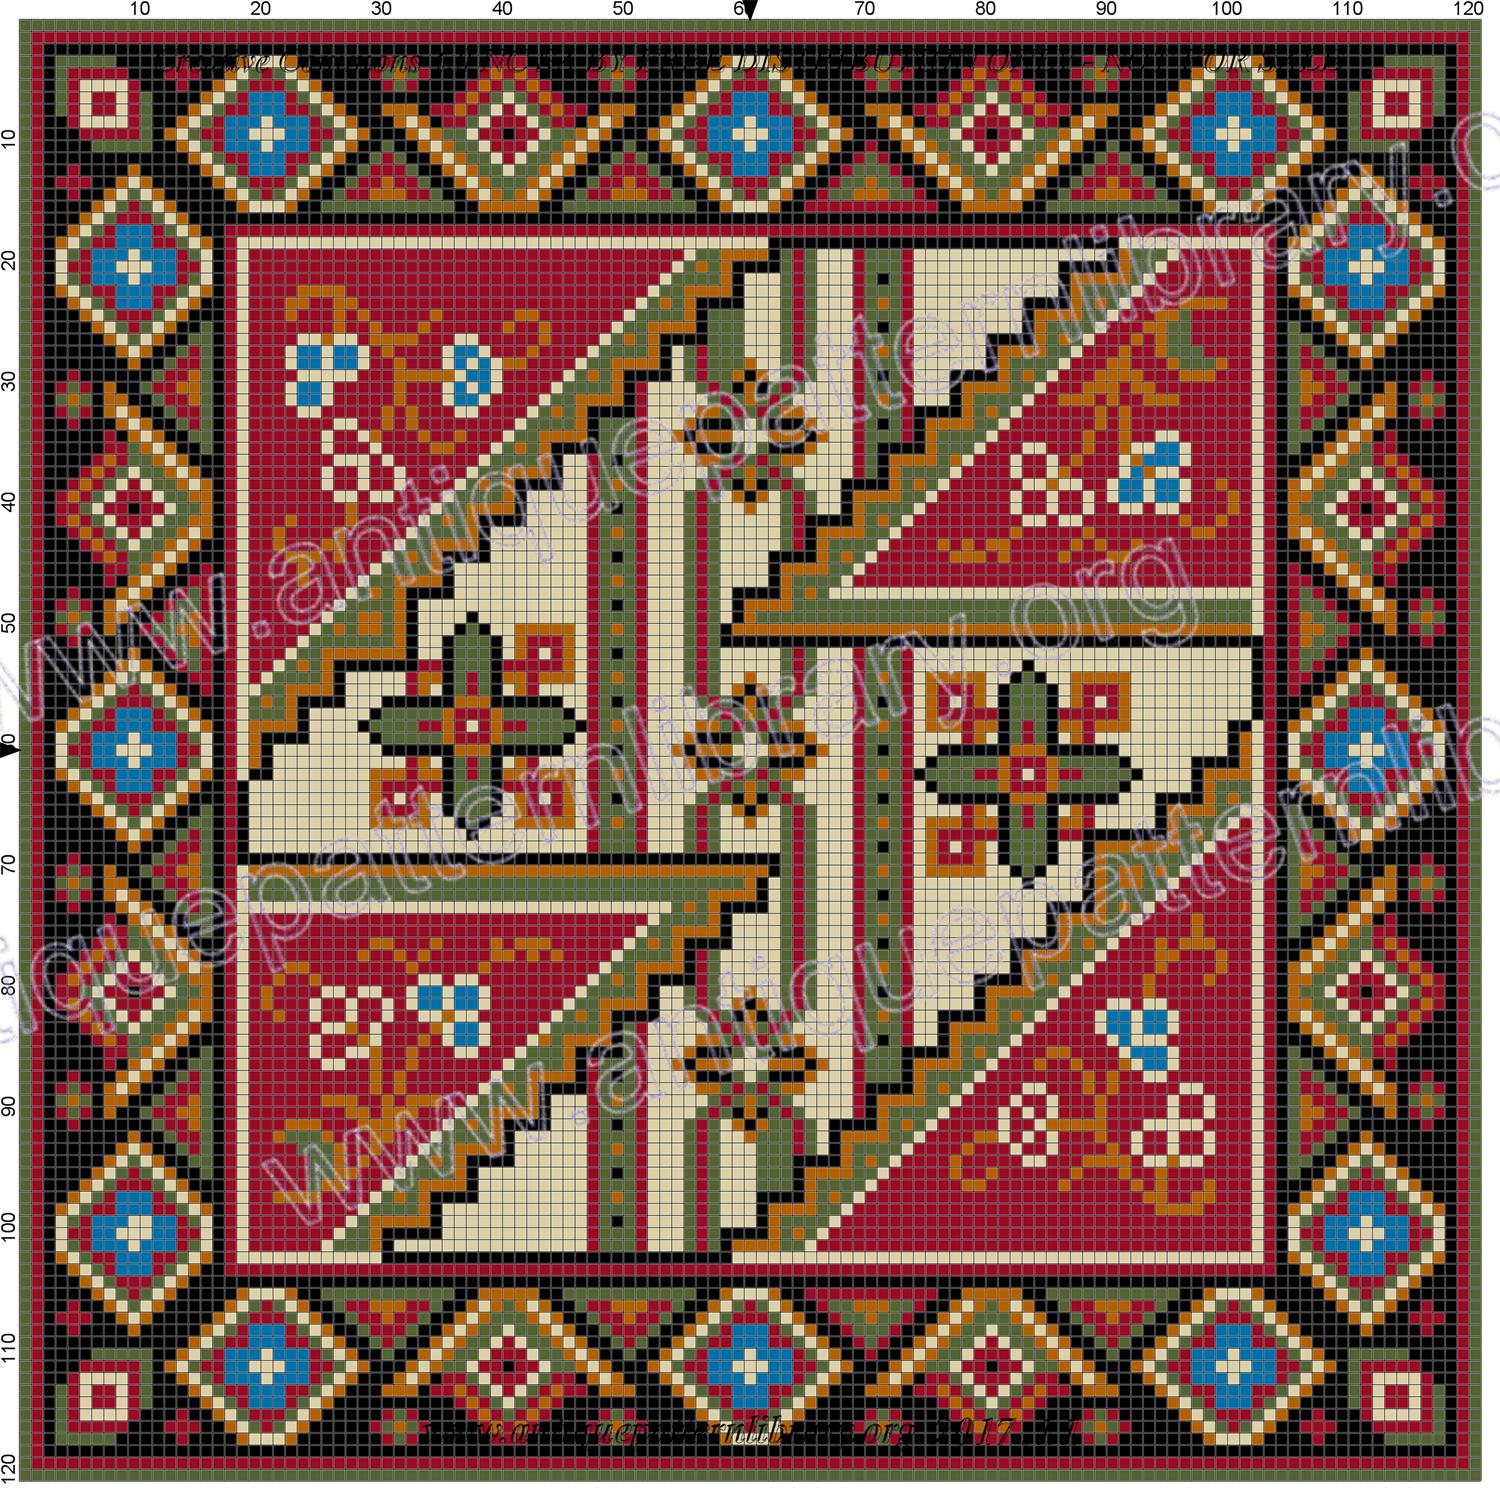 H-HB001 Small Persian tapestry square